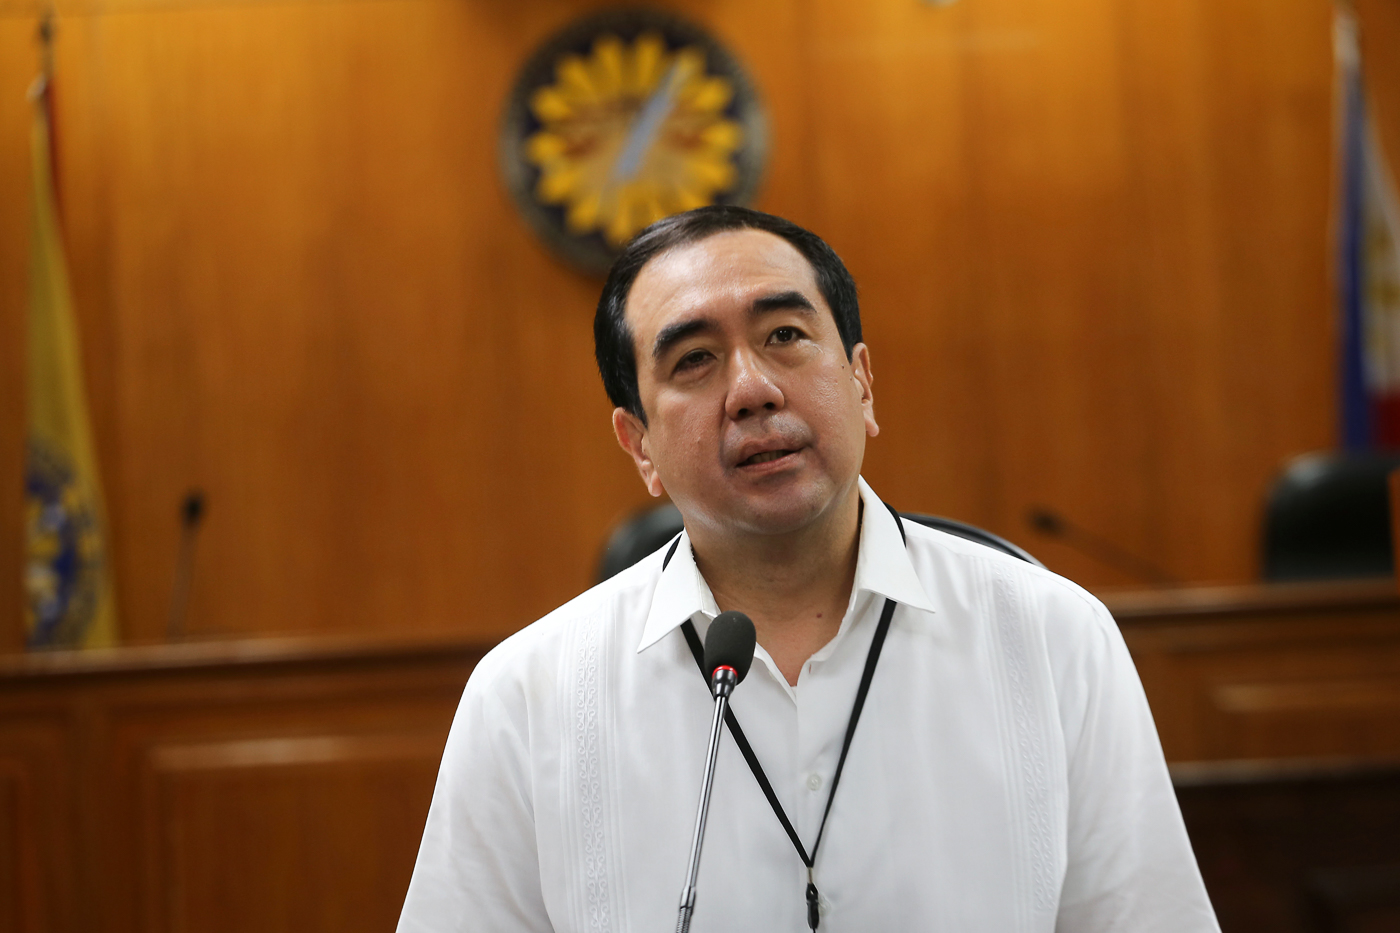 IMPEACHMENT JUNKED. Comelec Chairman Andres Bautista gets emotional during a press conference at the Comelec main office in Manila on August 7, 2017 regarding his marital dispute with his wife Patricia Bautista. File photo by Ben Nabong/Rappler  